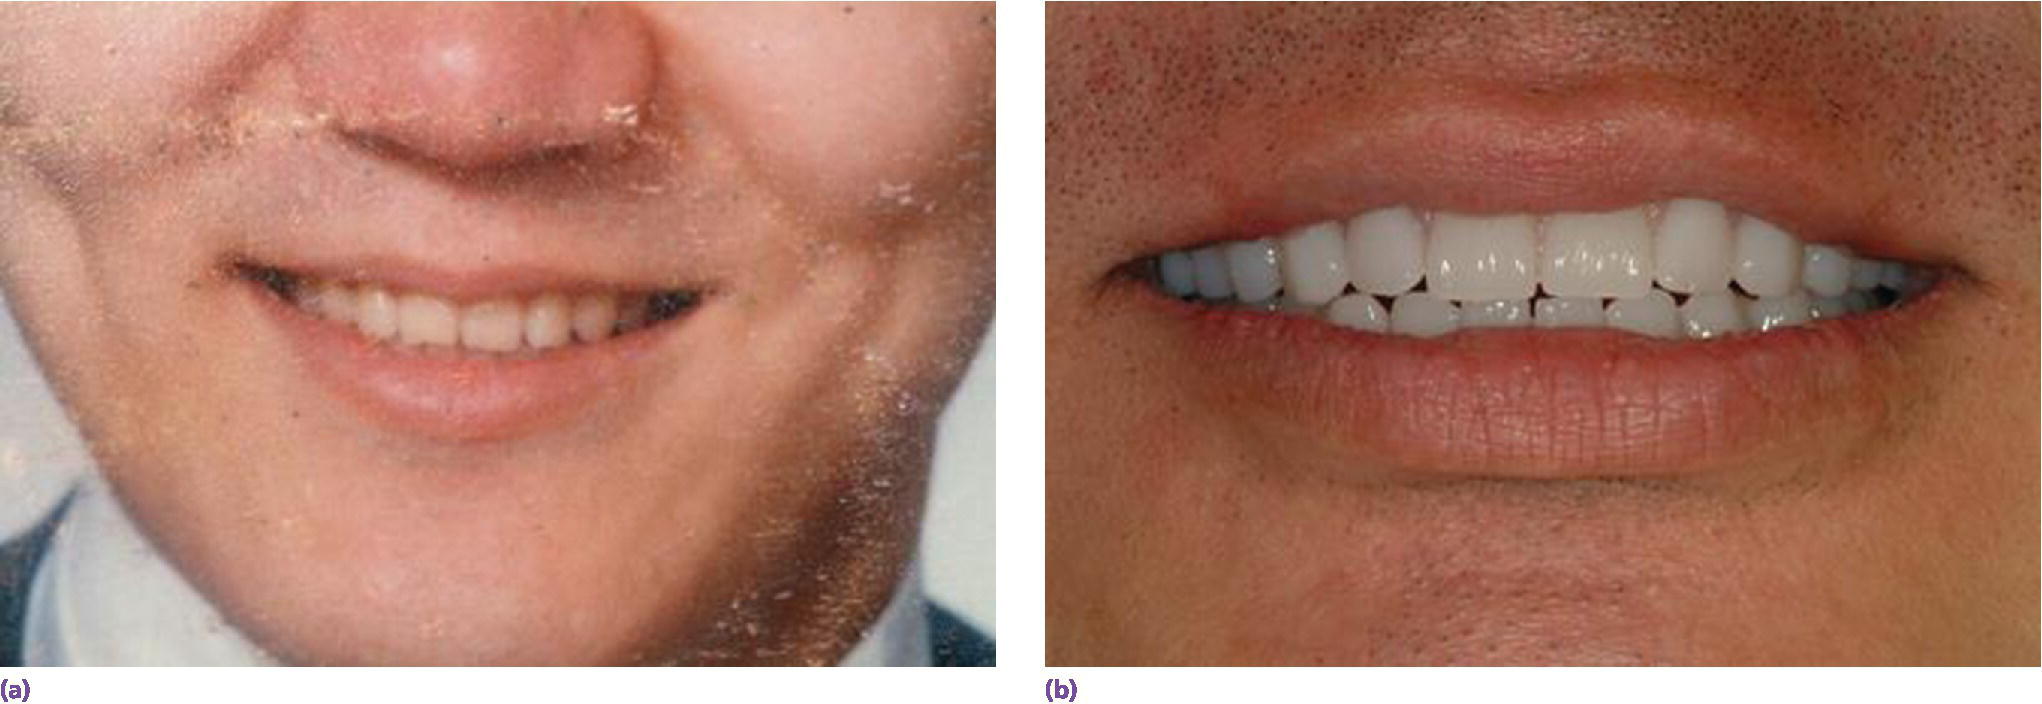 Photos displaying man smiling denoting high school graduation photo of patient with desired esthetics(left) and definitive prostheses with satisfactory lip support and achieved esthetics(right).